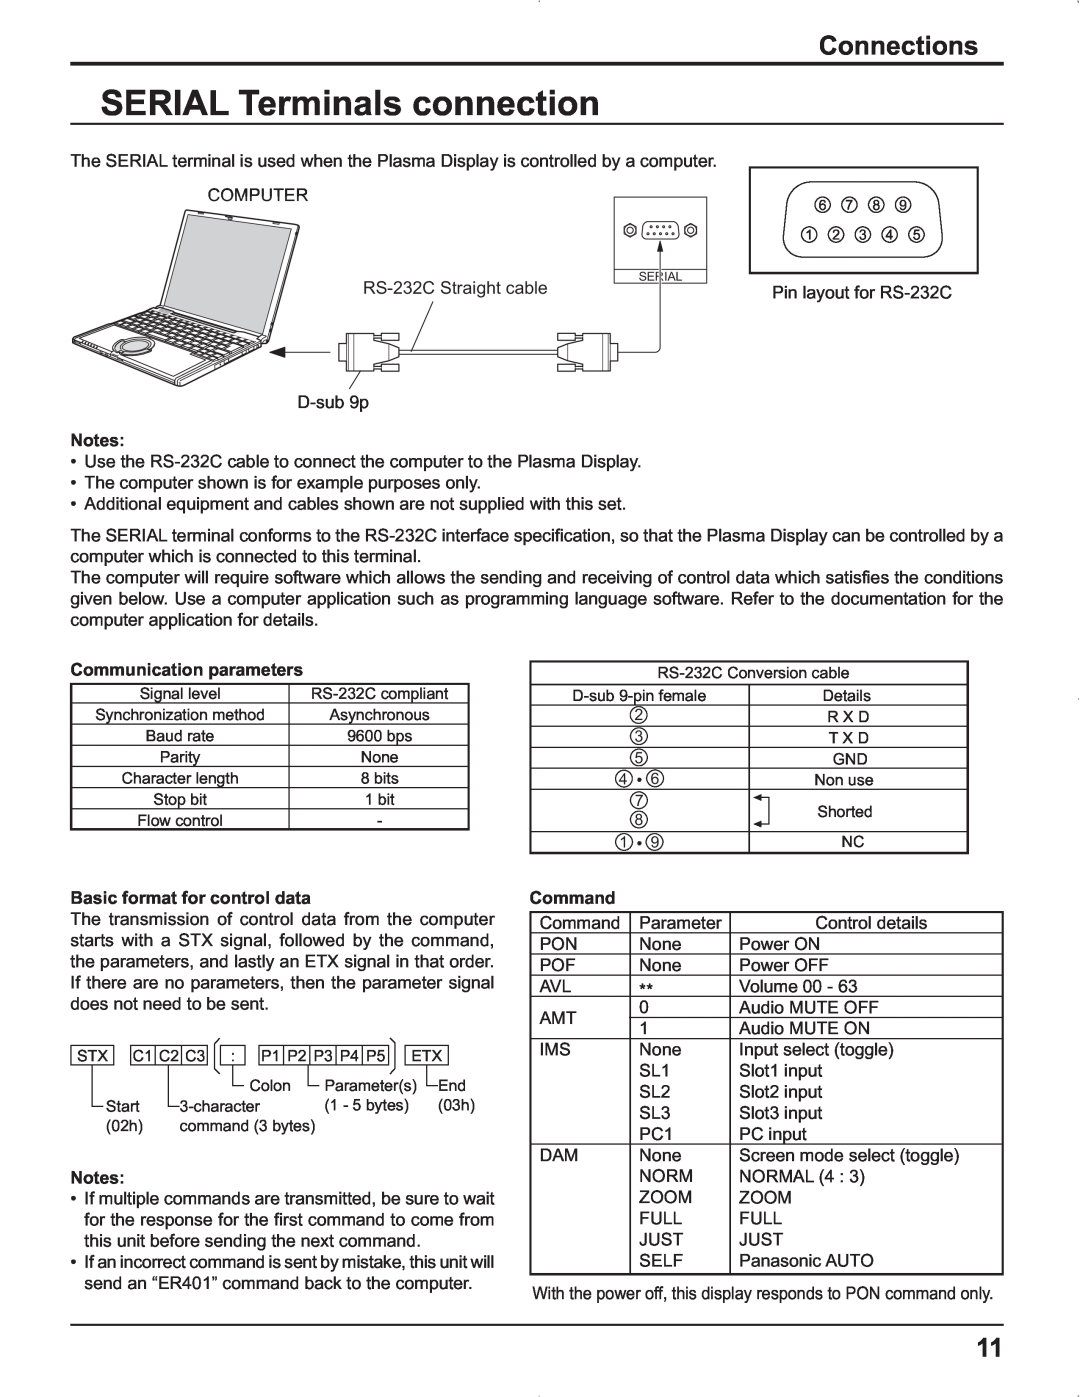 Panasonic TH-42PR9U SERIAL Terminals connection, Connections, Communication parameters, Basic format for control data 